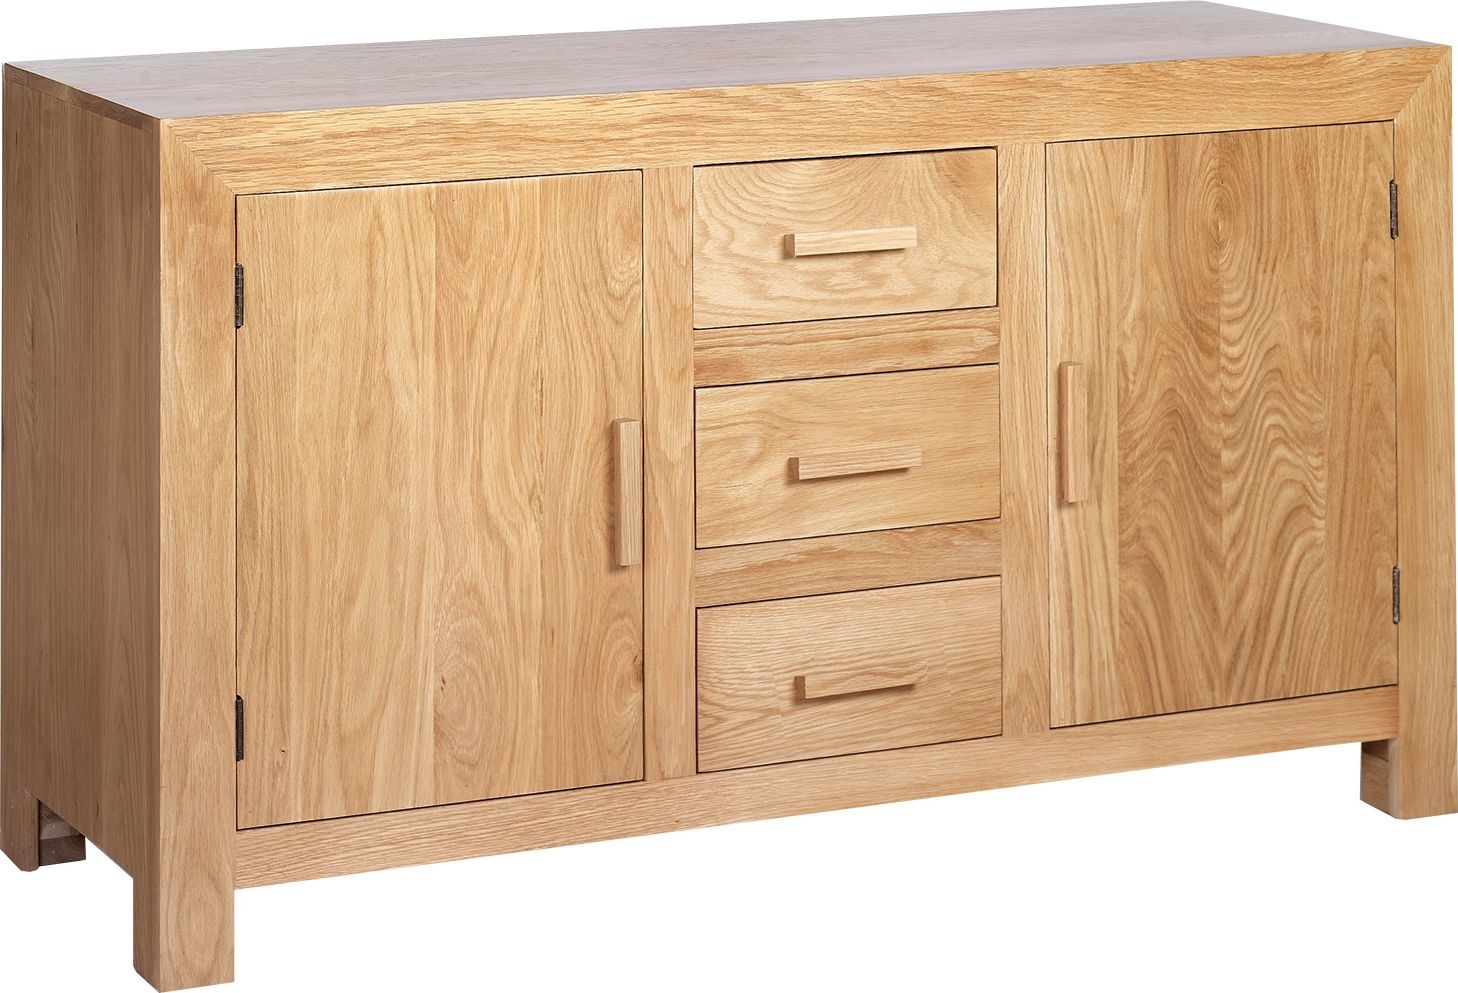 Cube Light Oak Medium Sideboard 135cm W With 2 Doors And 3 Drawers